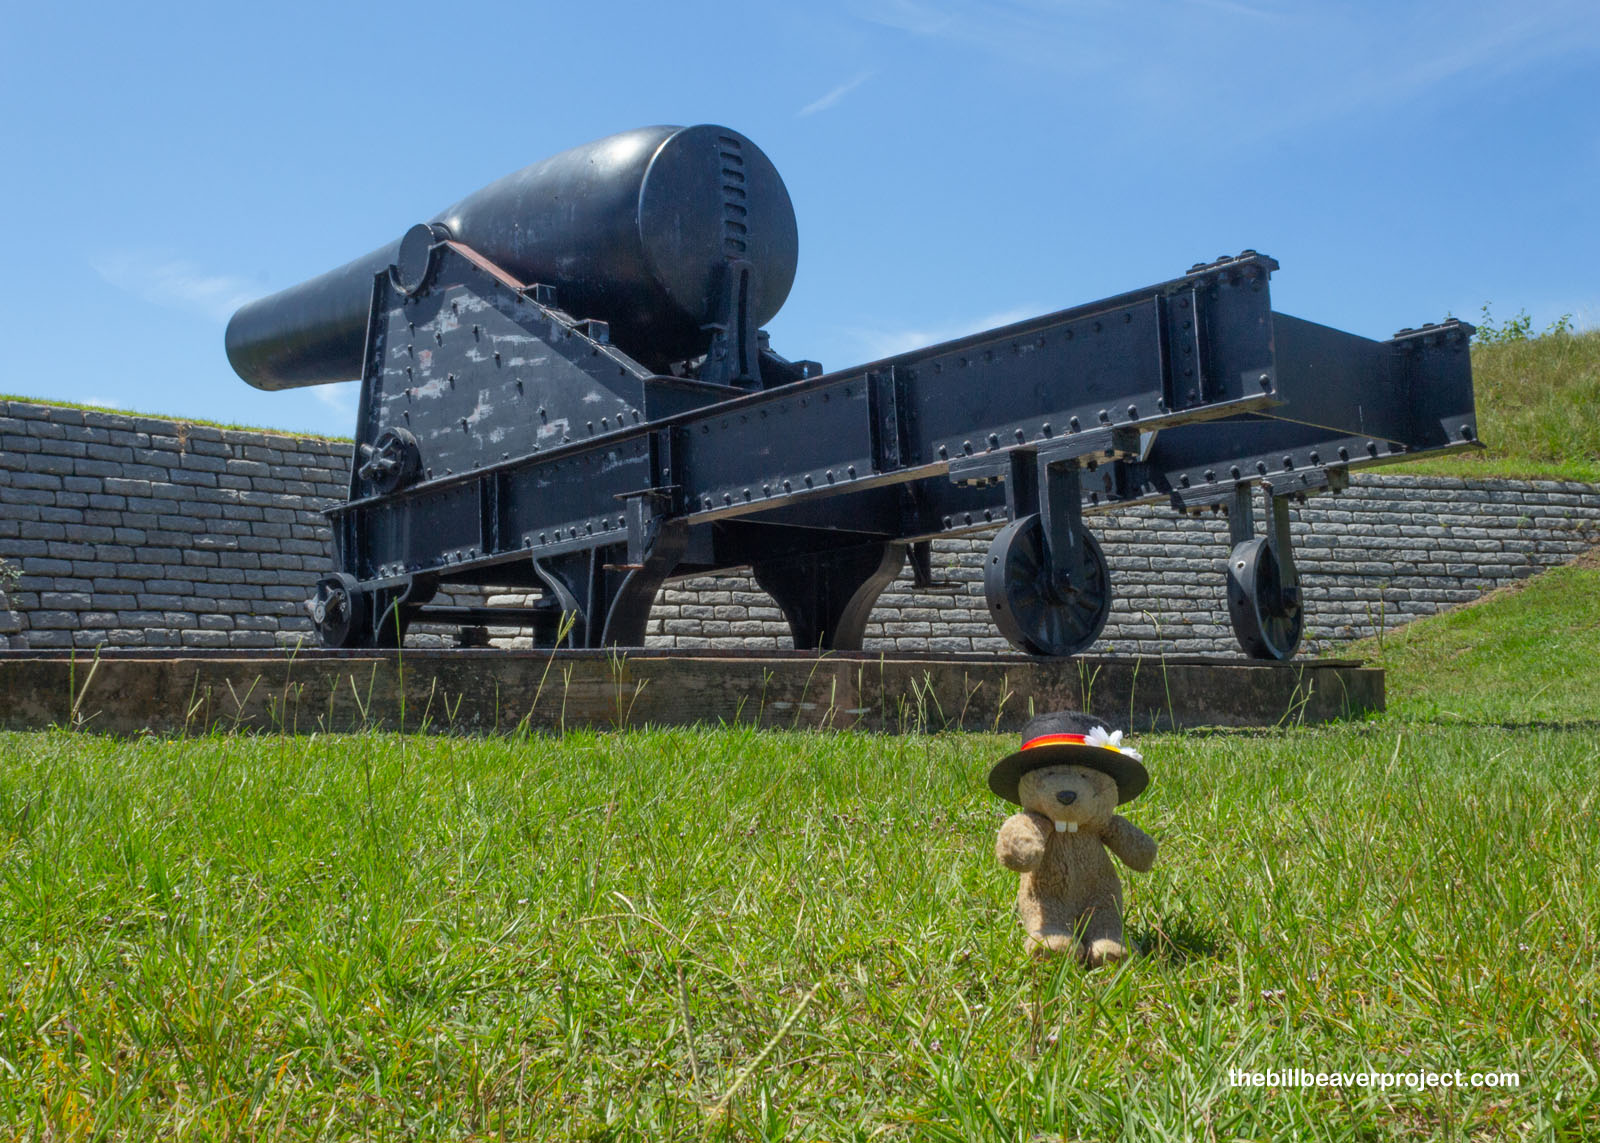 One of the rotating cannons installed at Fort Moultrie!